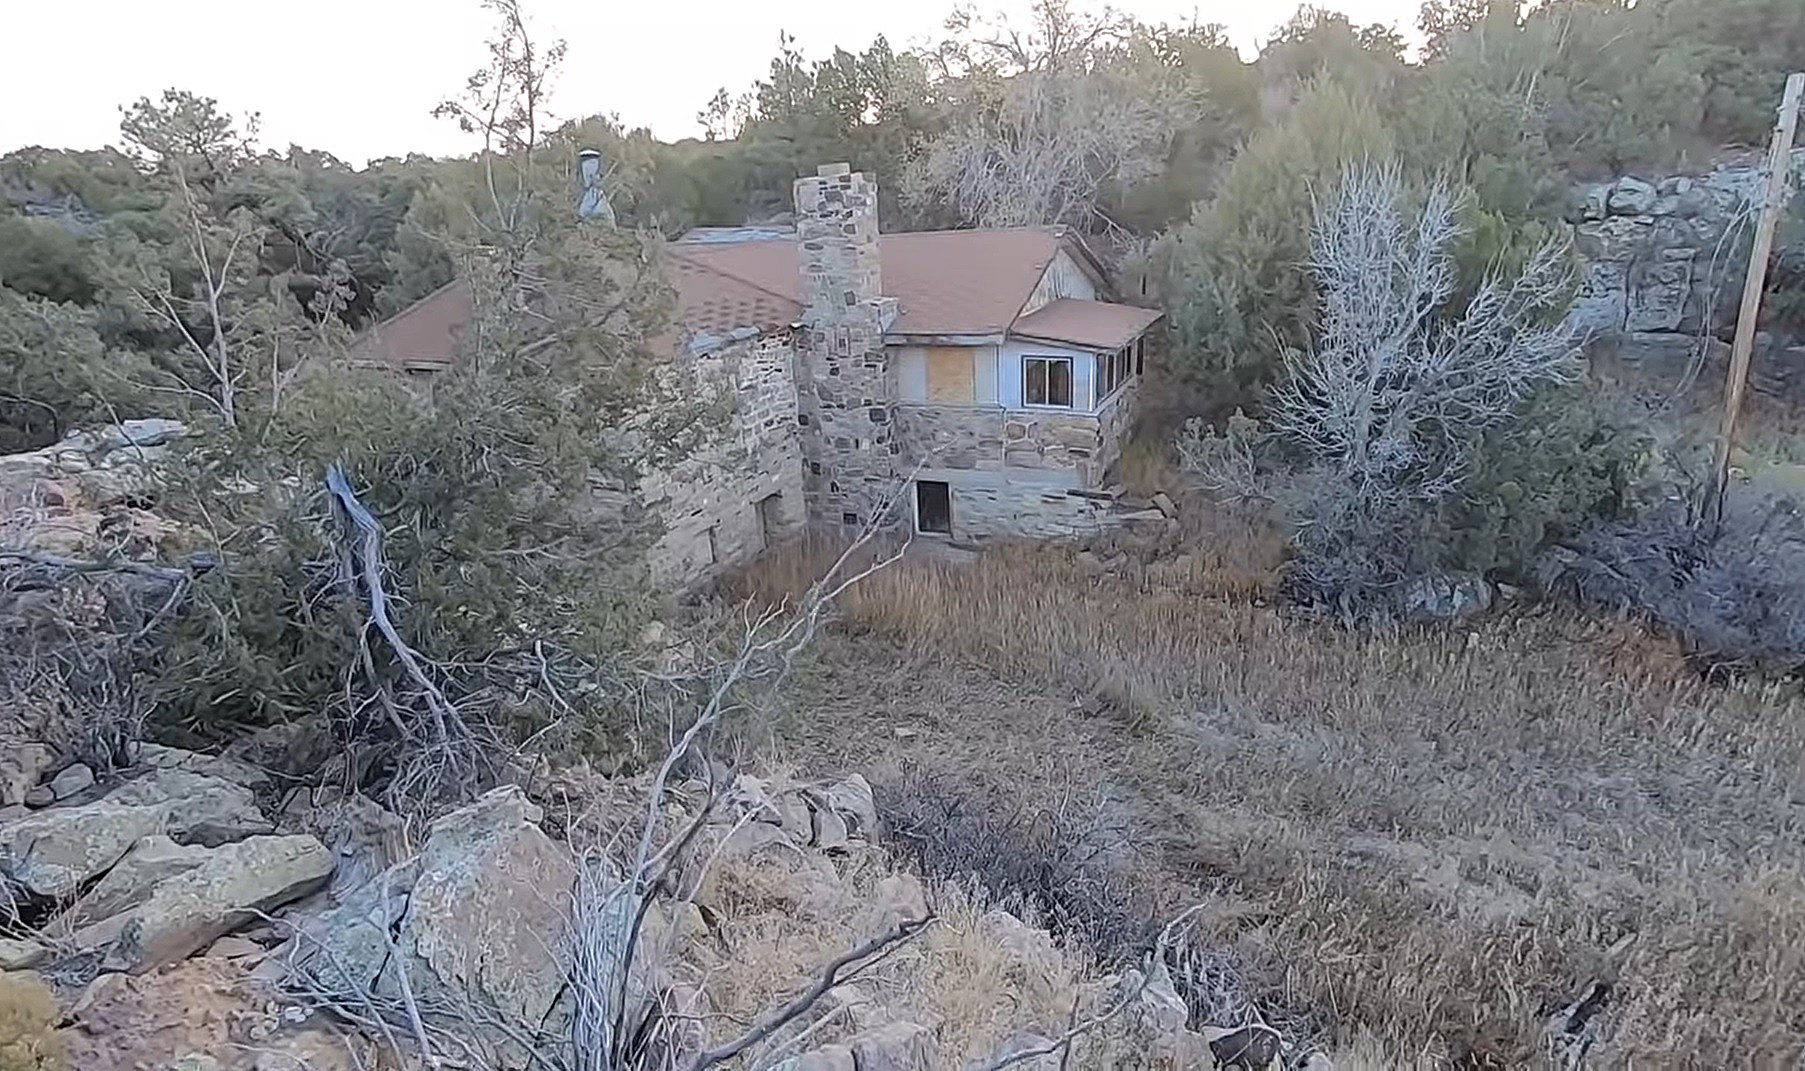 Guy Goes Camping, Finds Abandoned House & Cabin in a Canyon